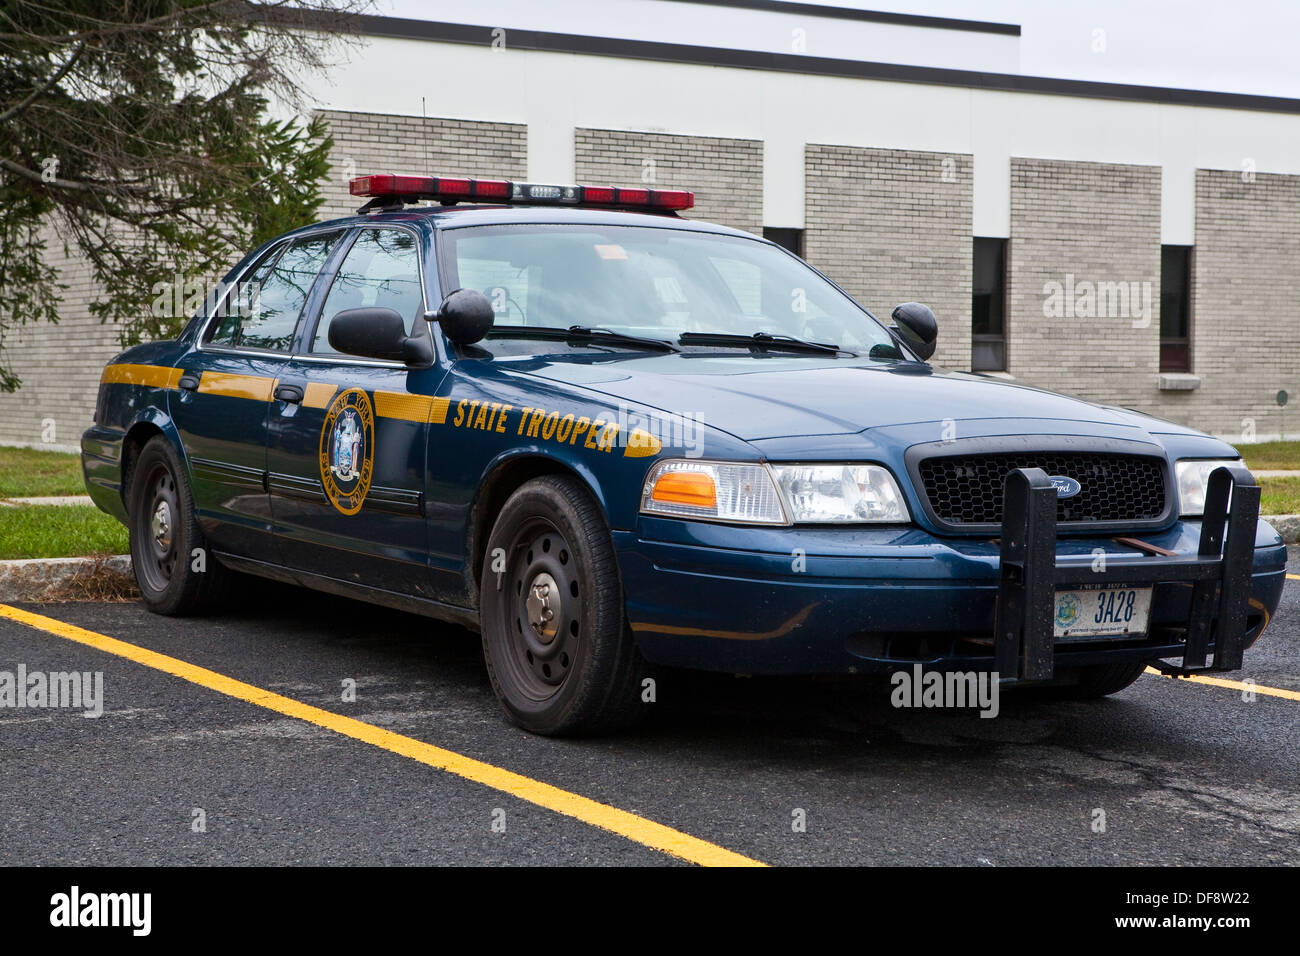 A New York State trooper car is parked in the New York State Police Academy in Albany, NY Stock Photo